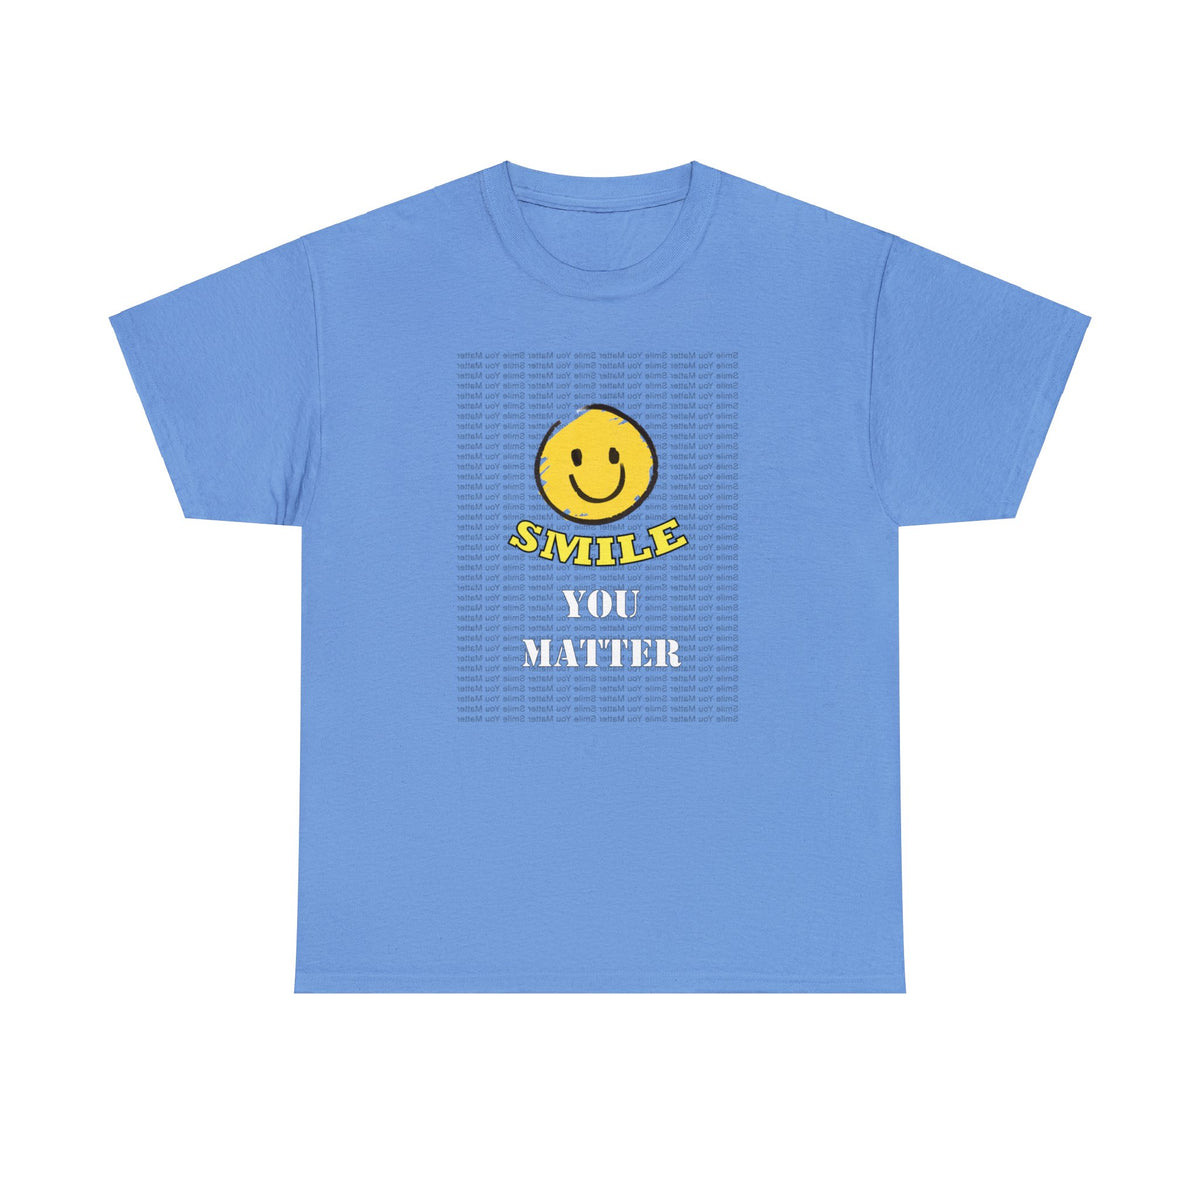 Smile. You Matter - Mental Health T Shirt, Inspirational, Positive Reflections - Shipping Included - WaterDragon Apparel